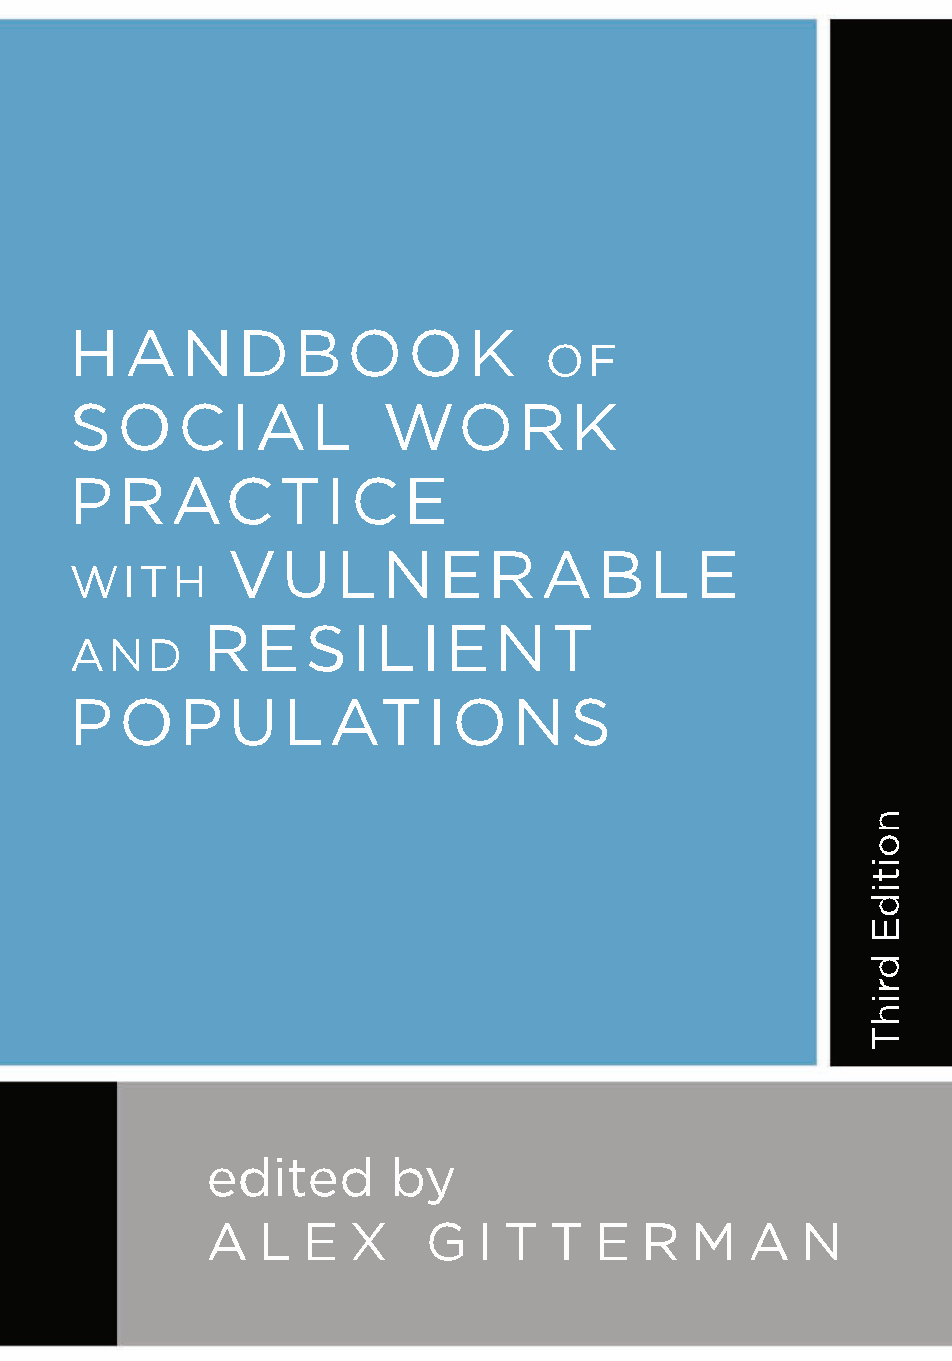 Handbook of Social Work Practice with Vulnerable and Resilient Populations, 3rd ed. page Front Cover1